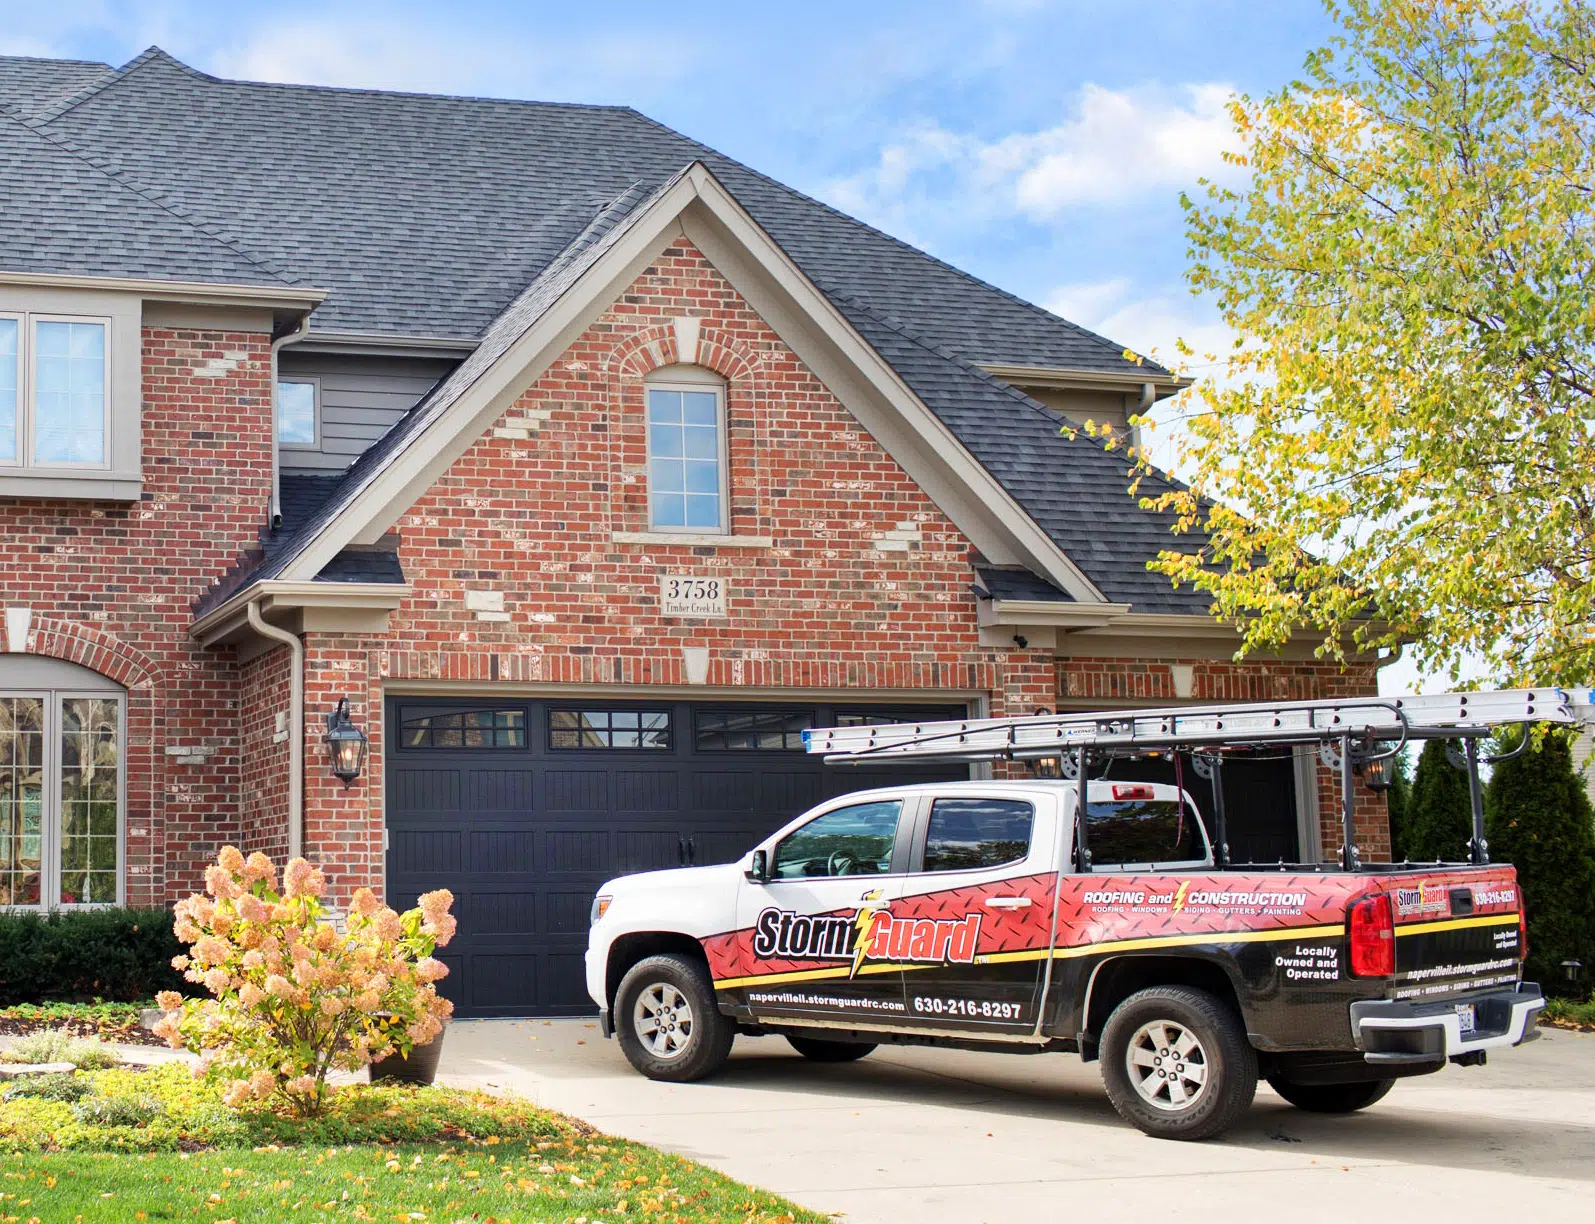 Brick House with Storm Guard Restoration Services Truck In Driveway - Naperville